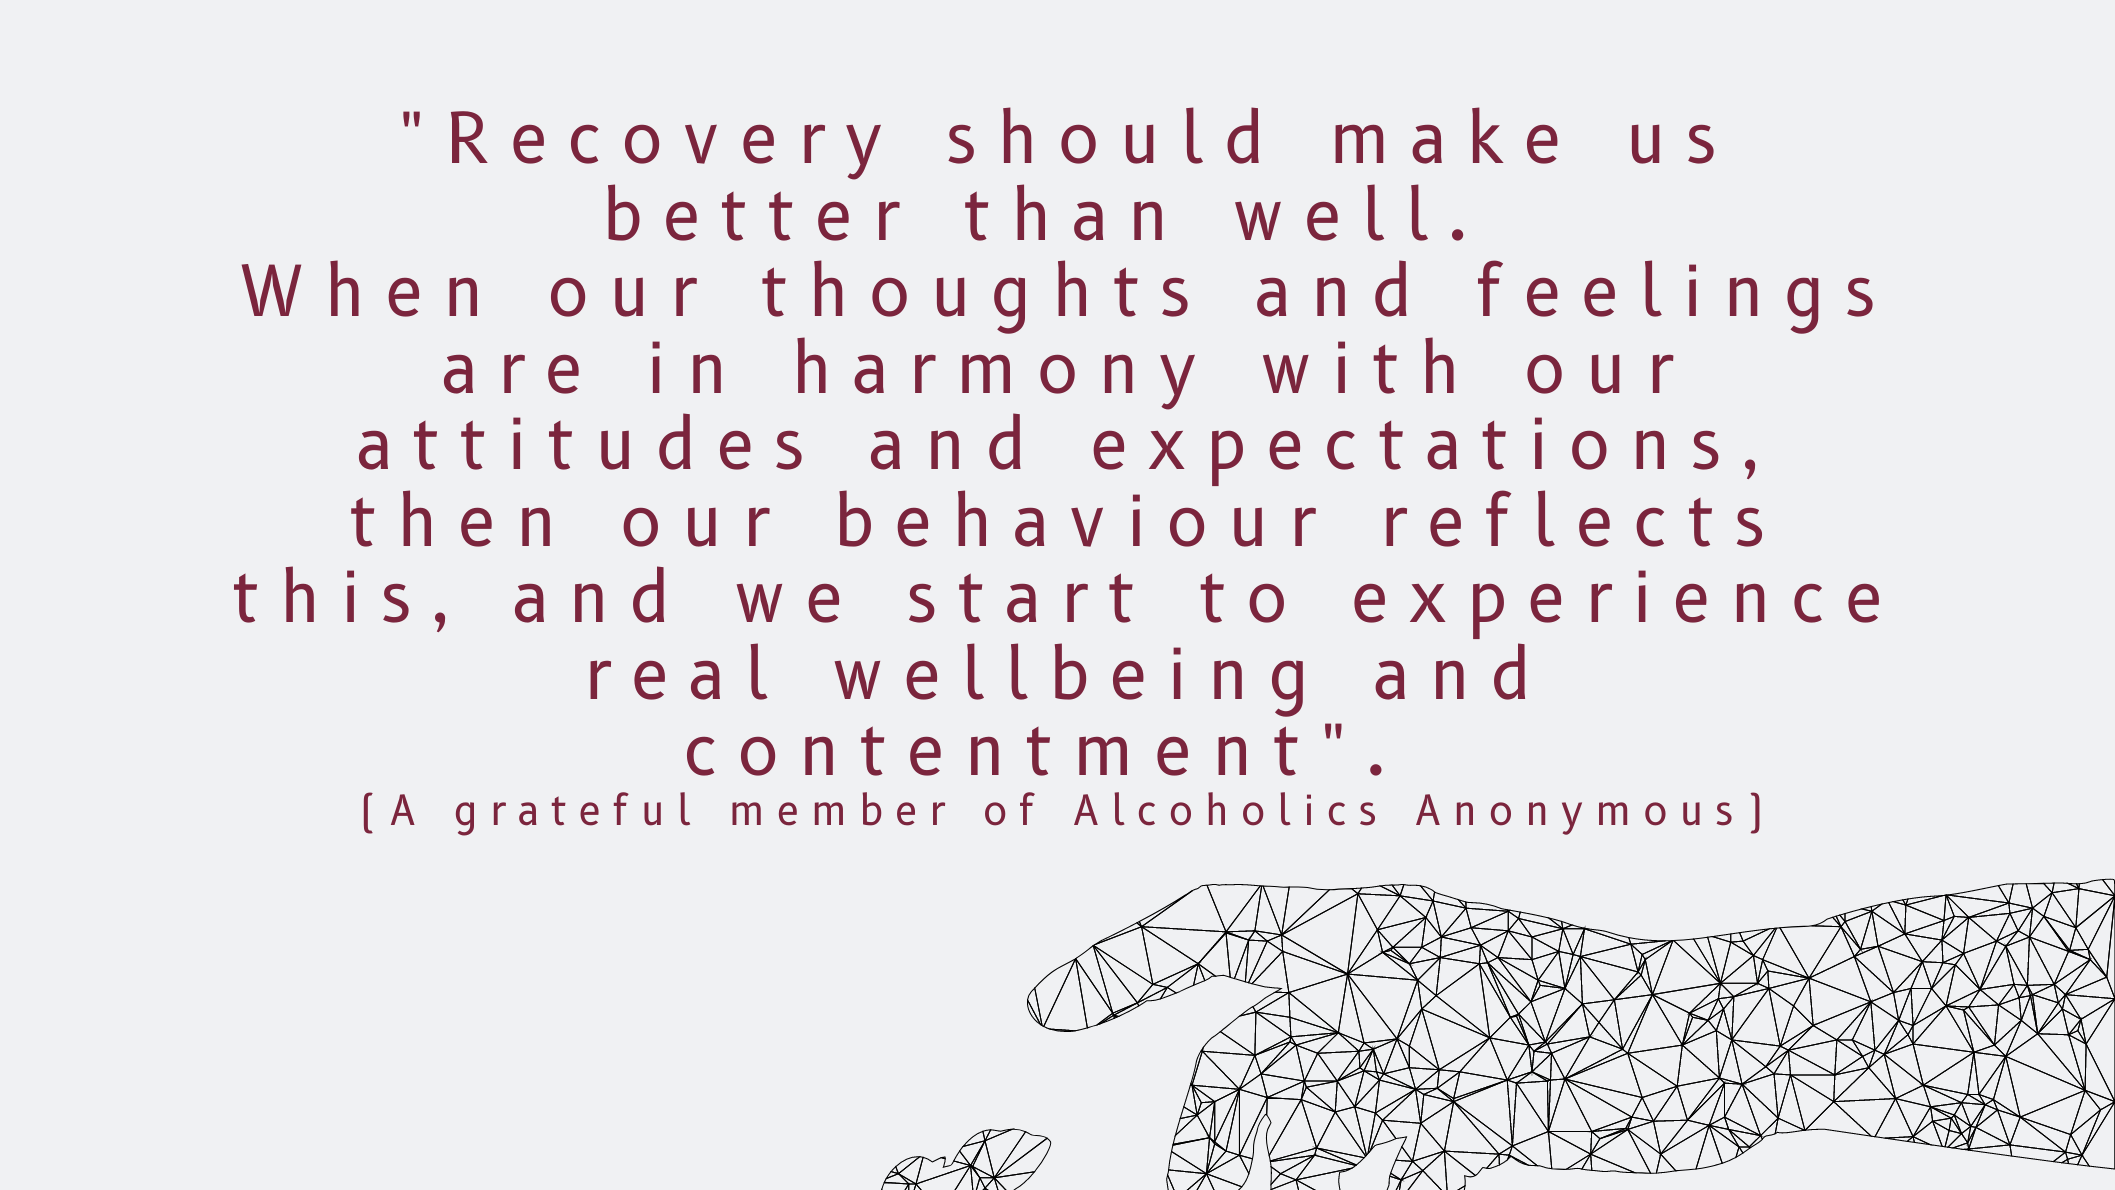 recovery days header